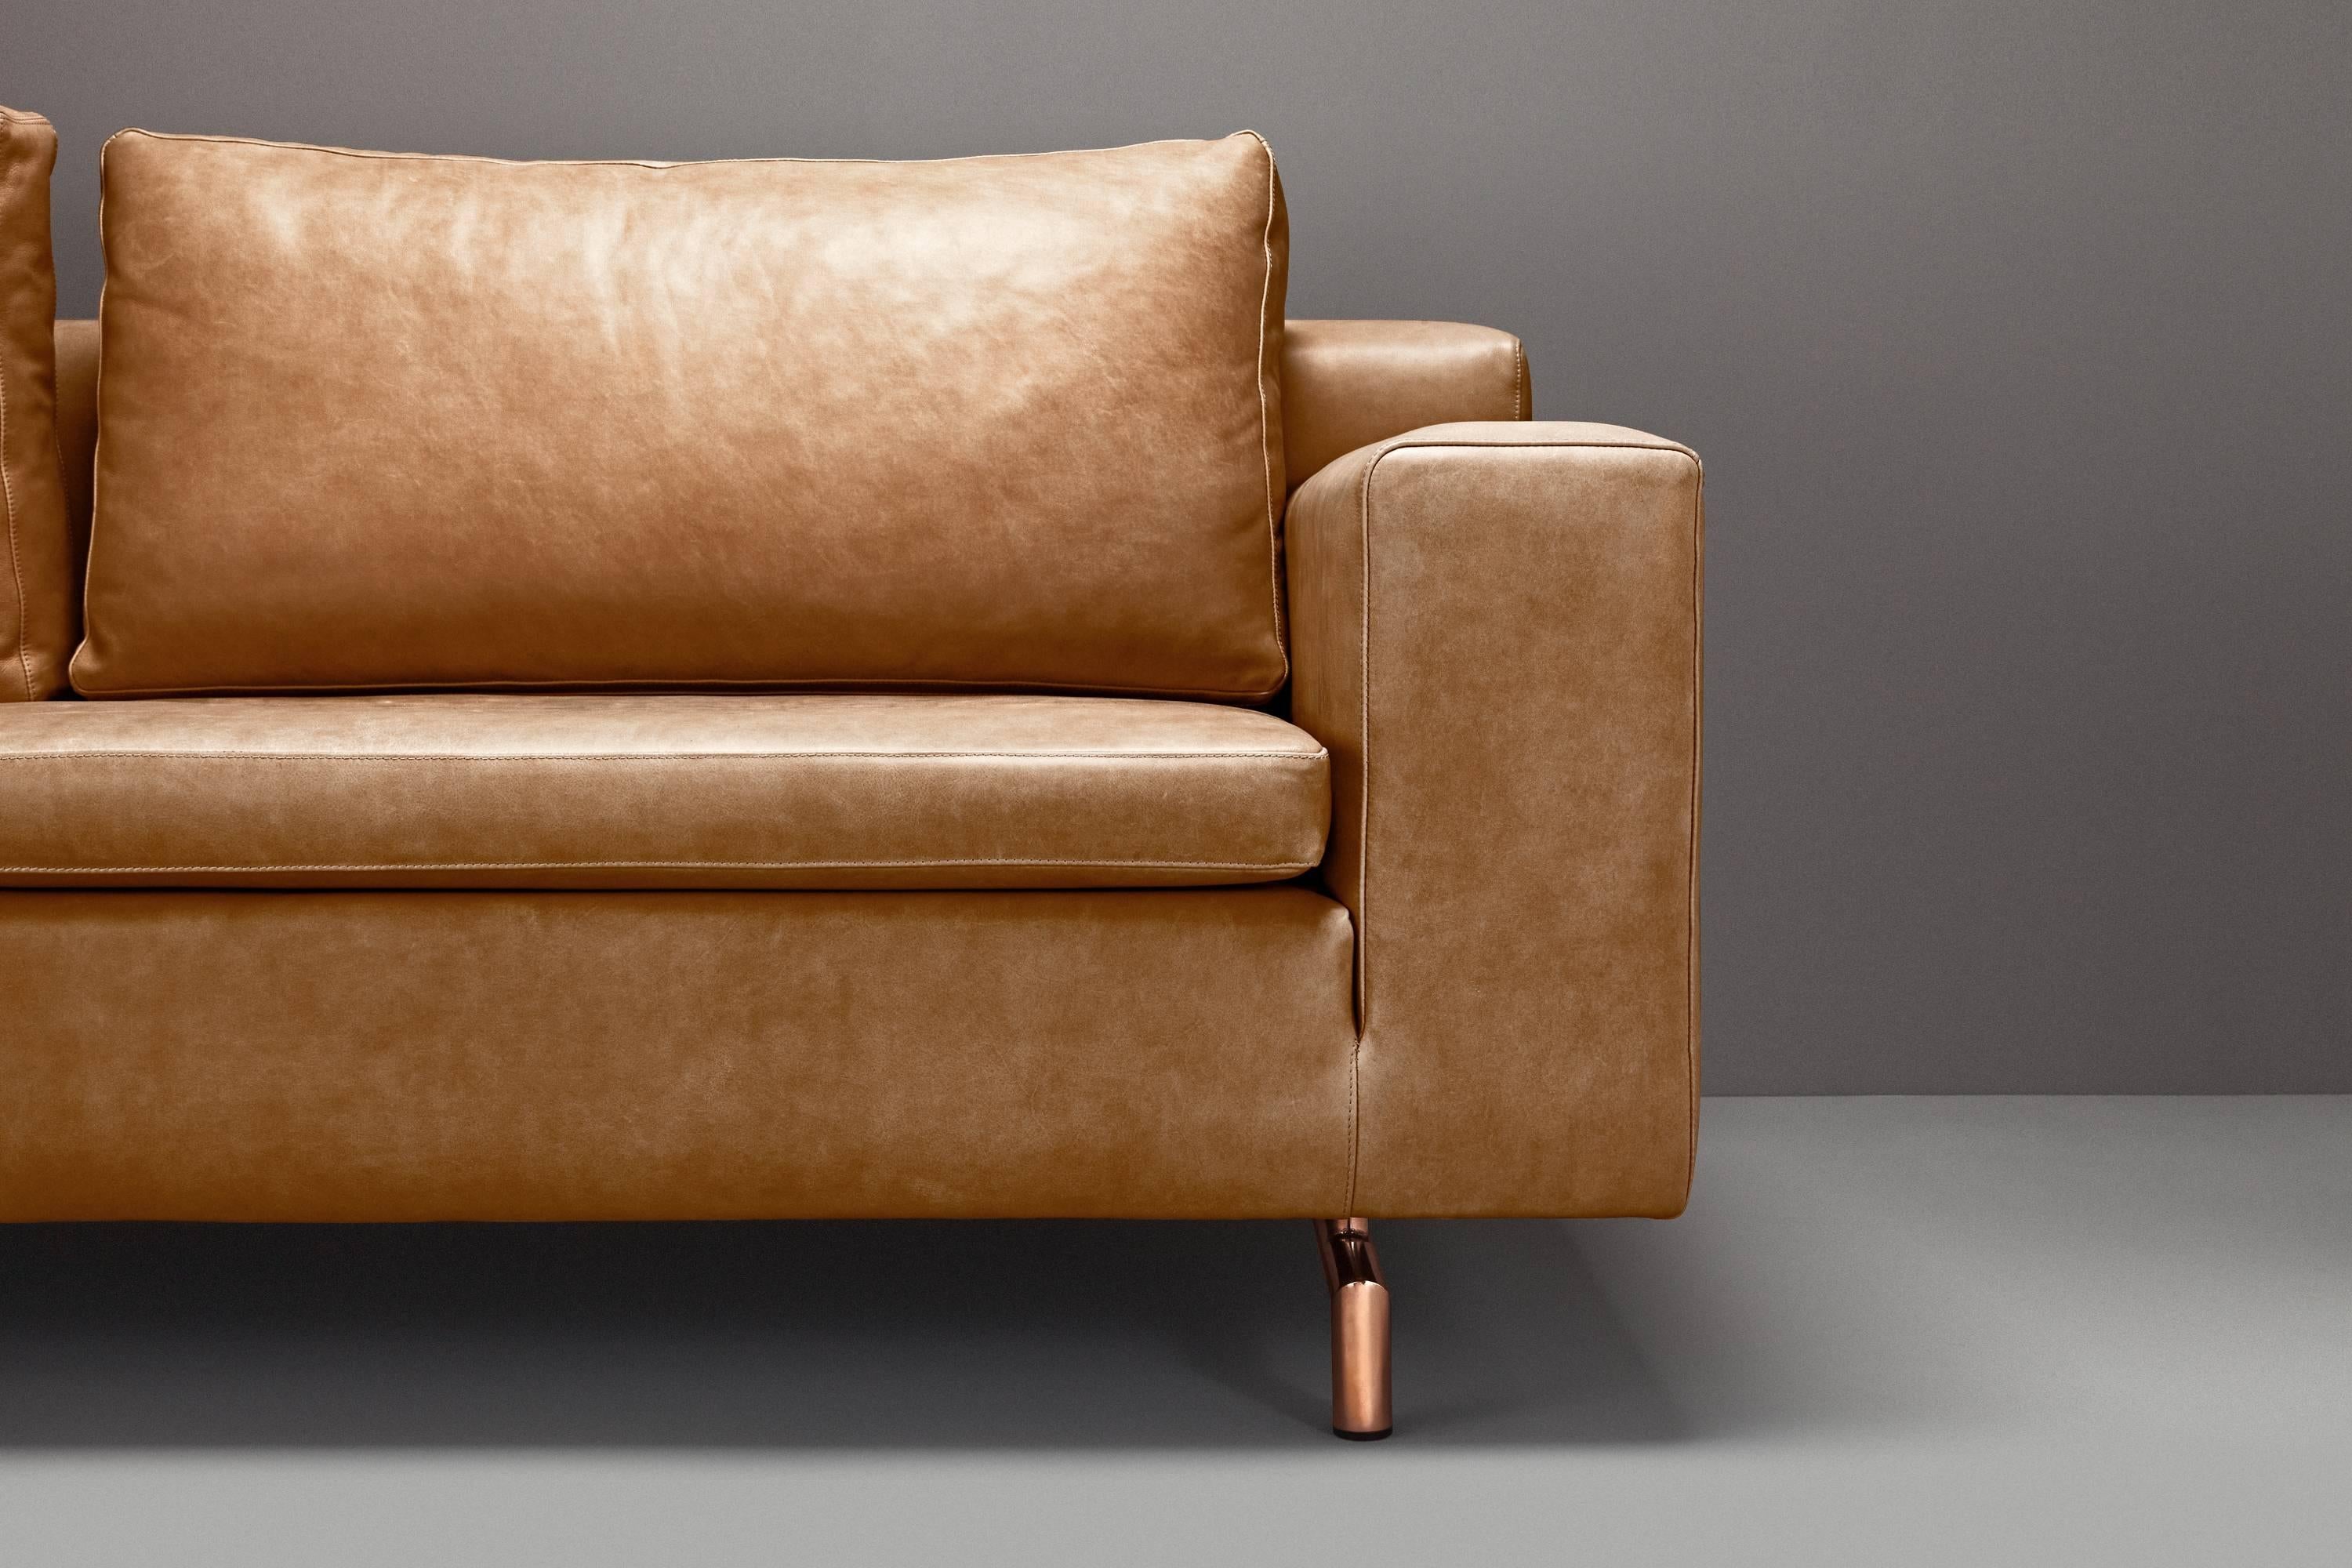 Norman sofa by Pepe Albargues

Dimensions: 86 x 200 x 102
Technical features: 
Pinewood structure reinforced 
with tablex and chipboard. 
Suspension with springy belts. 
Seat cushions stuffed with 
Bultex and sofa covered with 
polyester fibre.